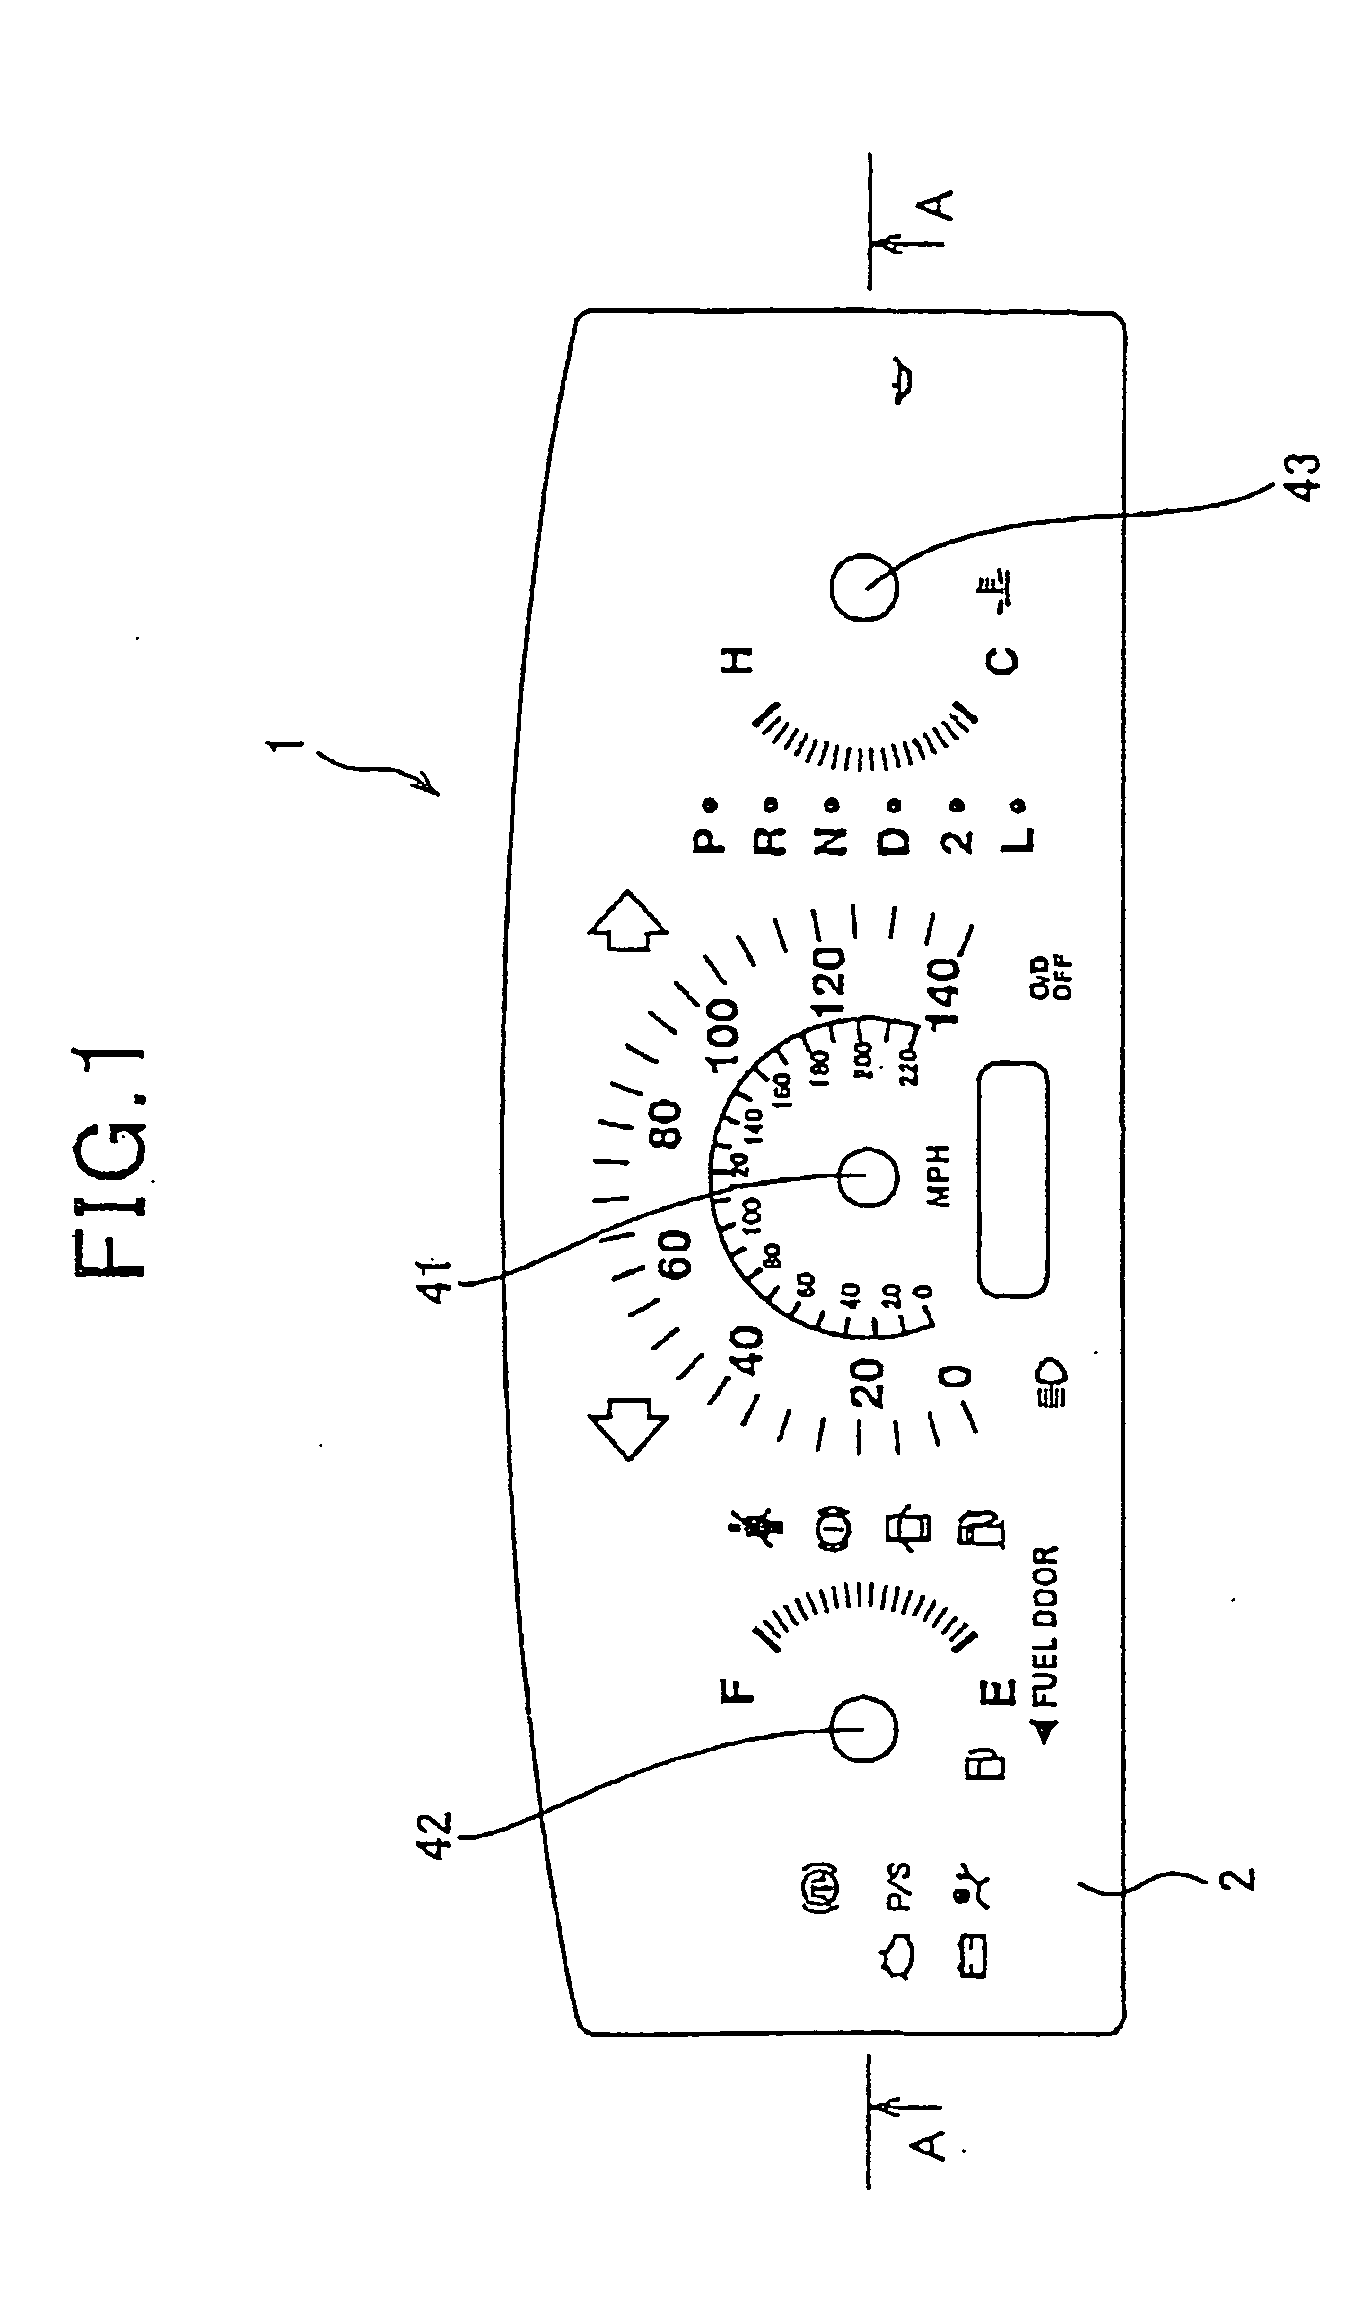 Display panel, method for producing the same and composition of ink used by the method for producing the same